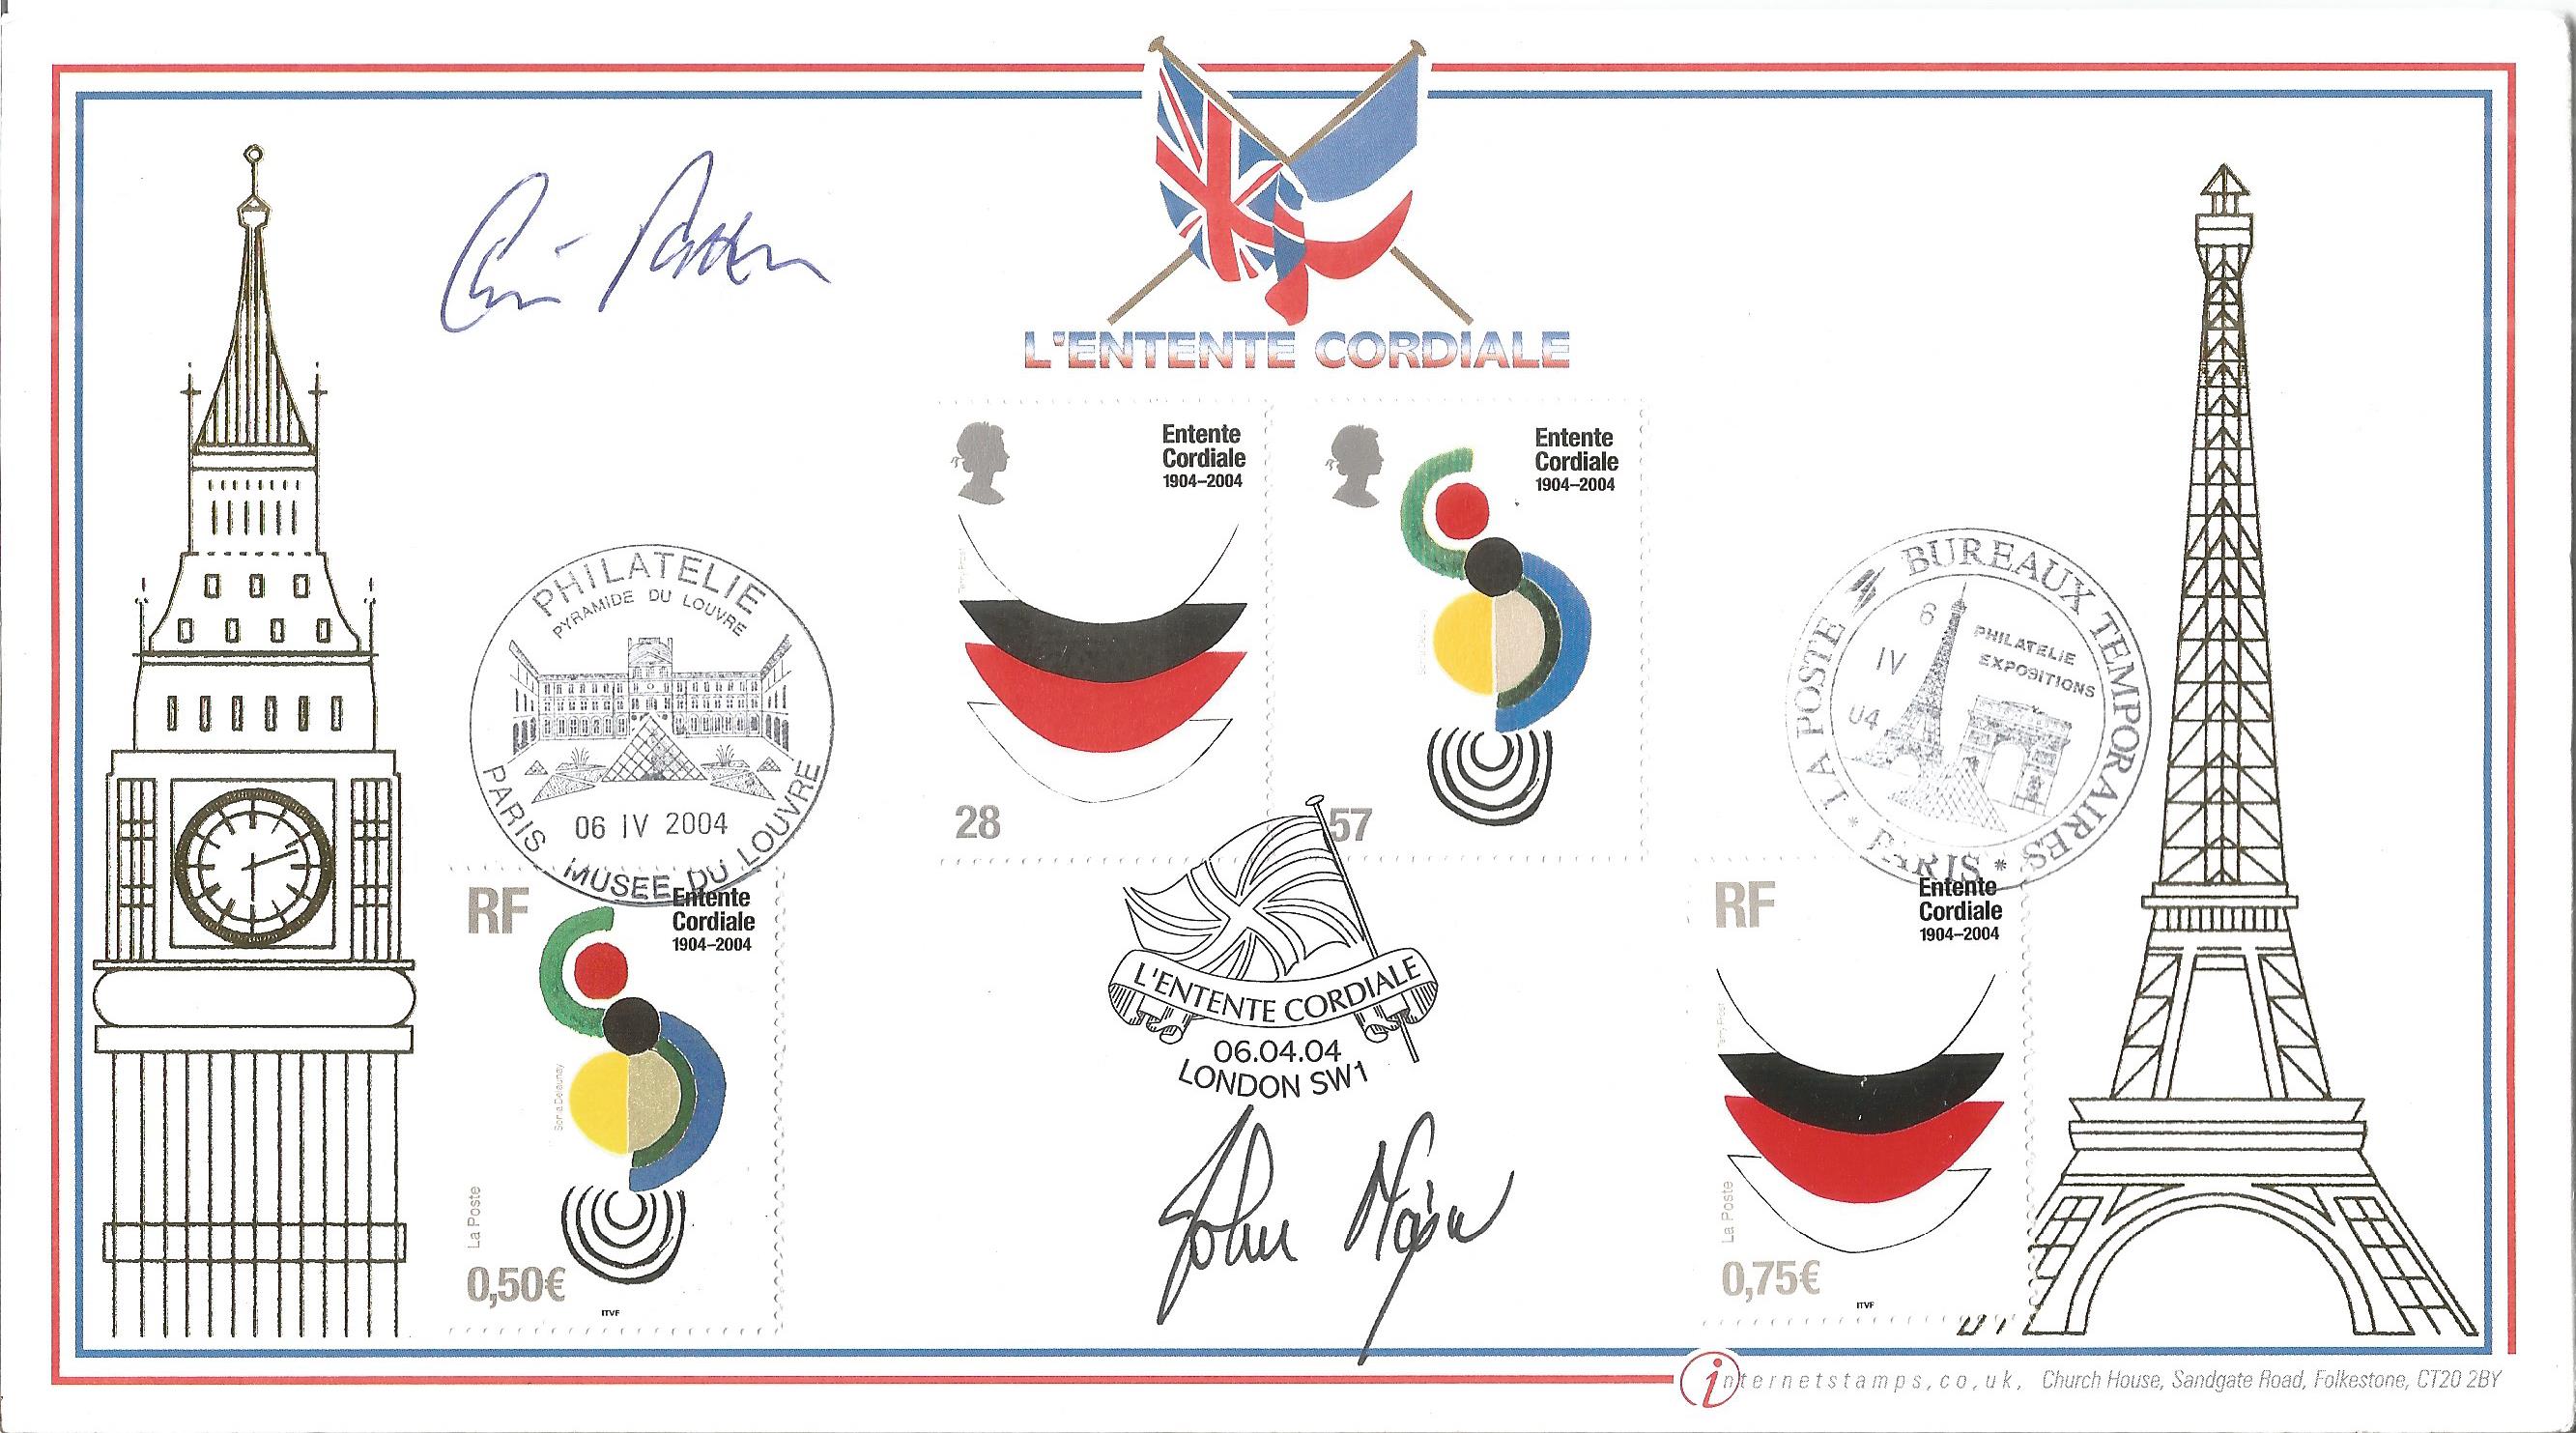 John Major and Chris Patten signed FDC featuring images of Big Ben the English Capital Landmark